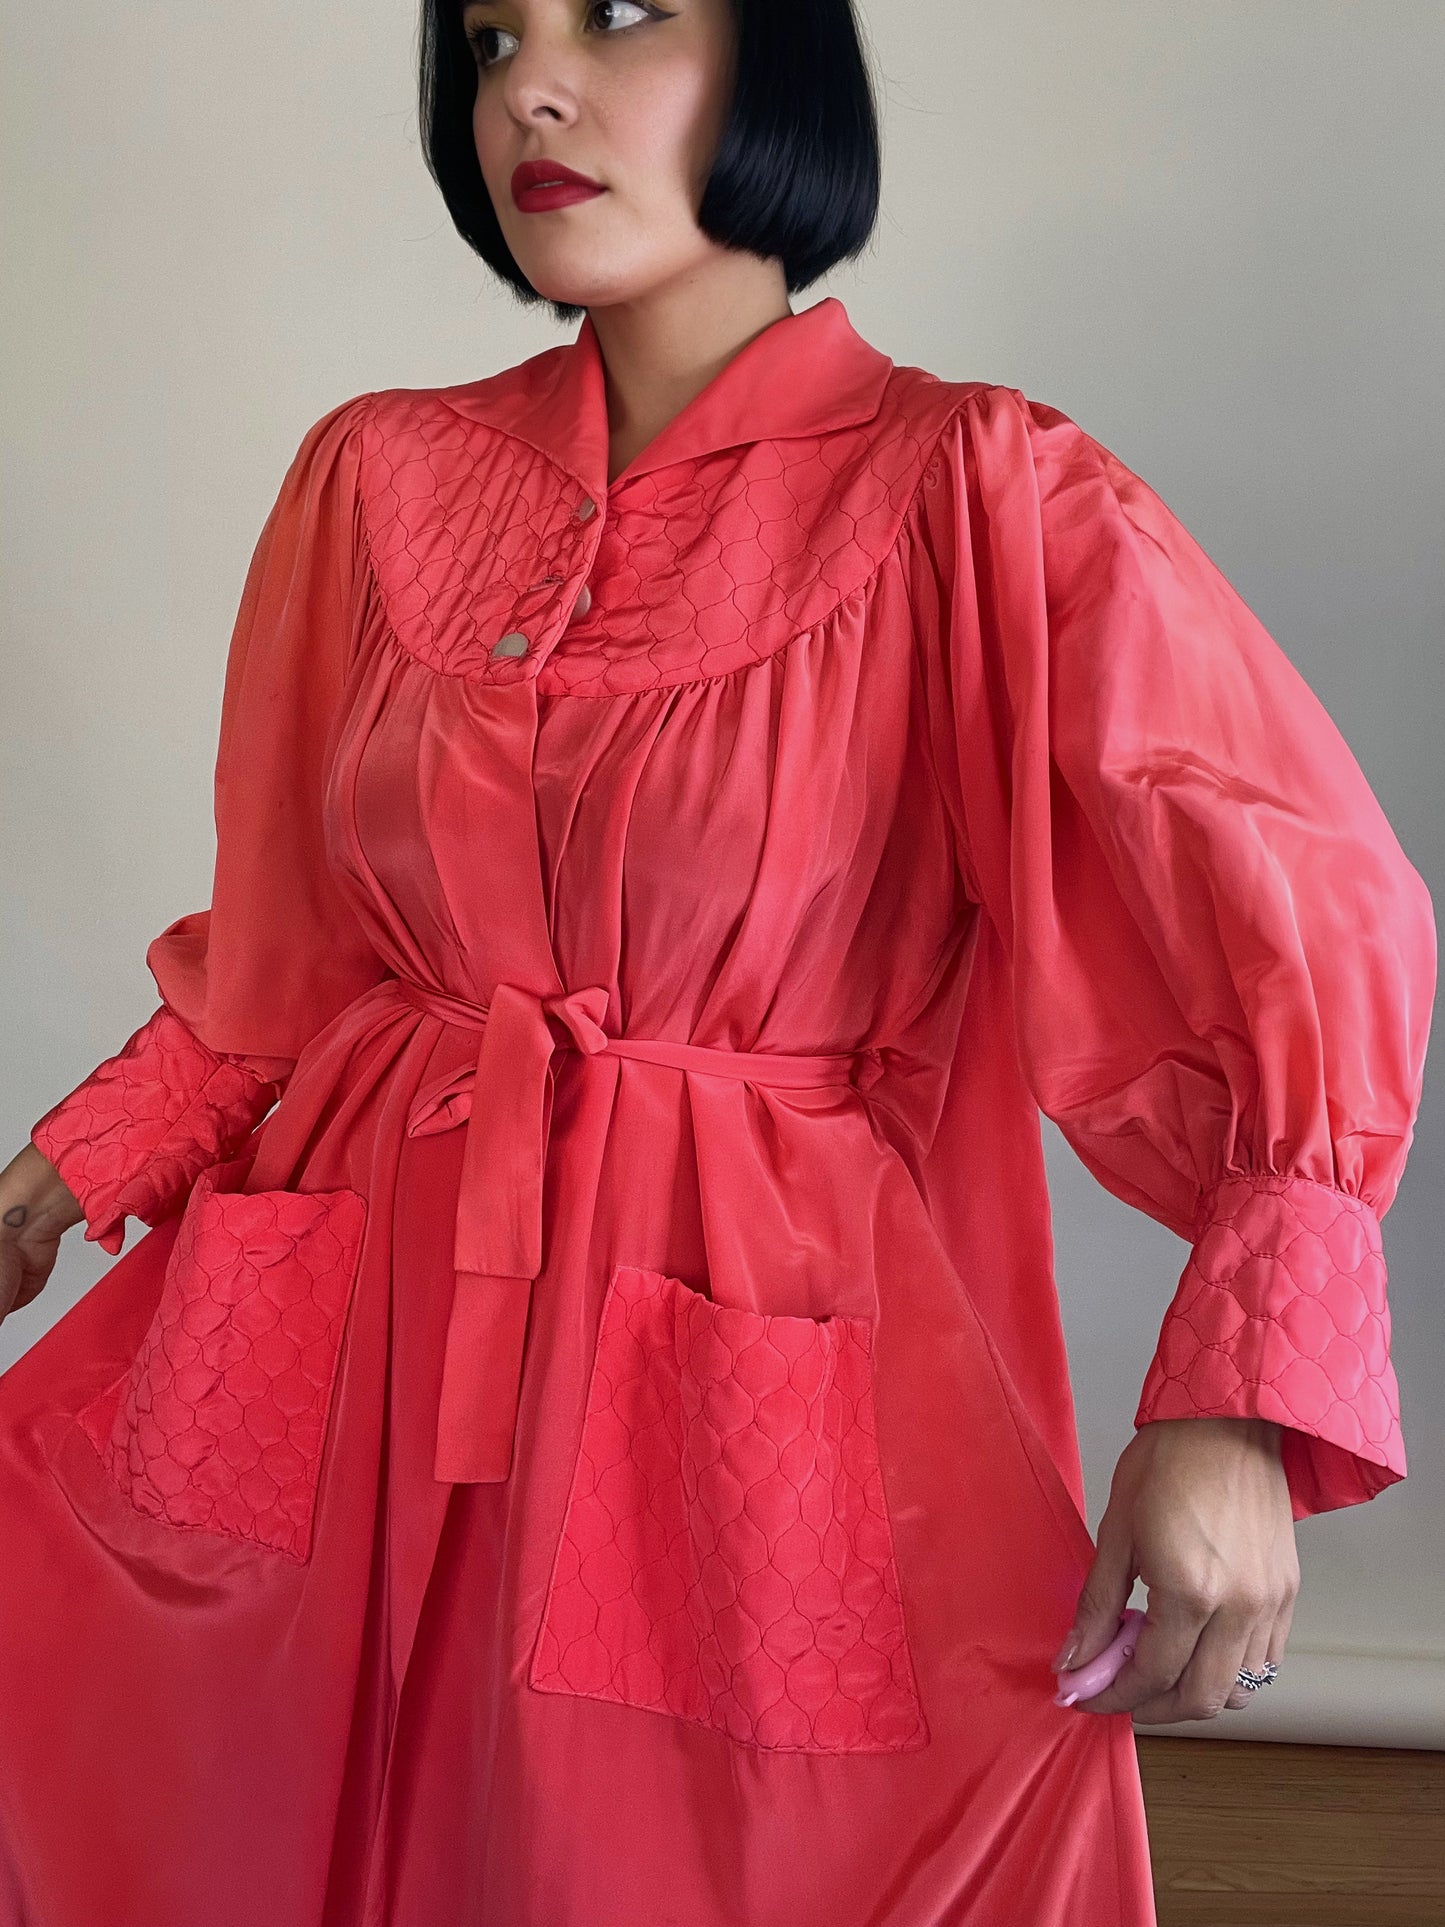 Vintage 40s 50s Salmon Coral Pink Duster Coat w/ Balloon Sleeve Fits Most Sizes